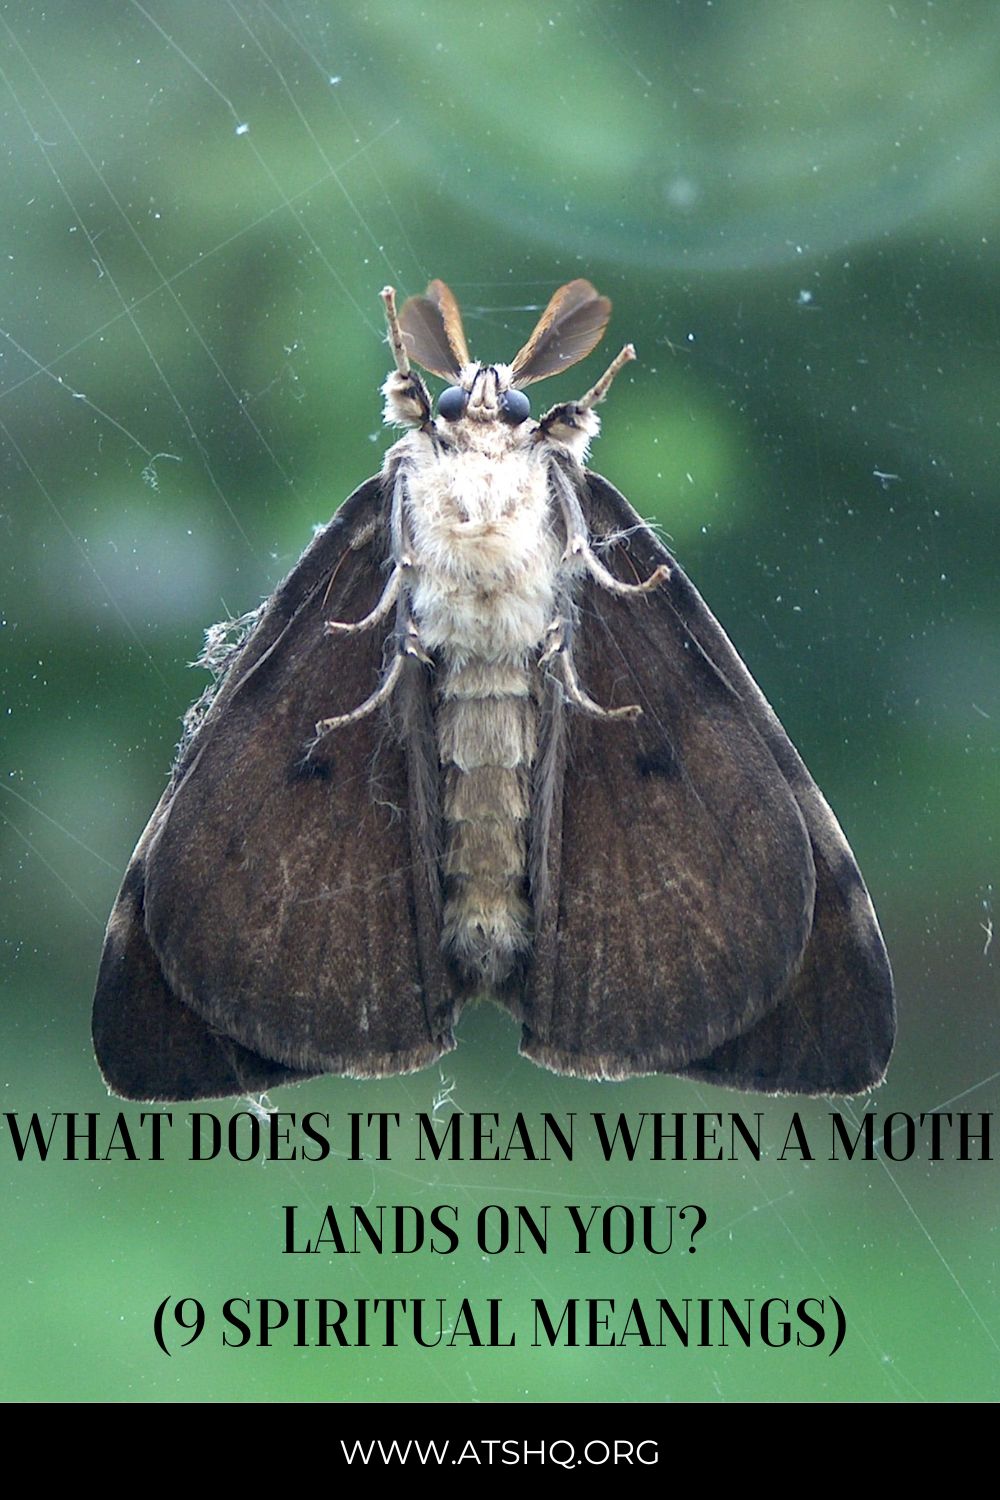 What Does It Mean When a Moth Lands On You? (9 Spiritual Meanings)